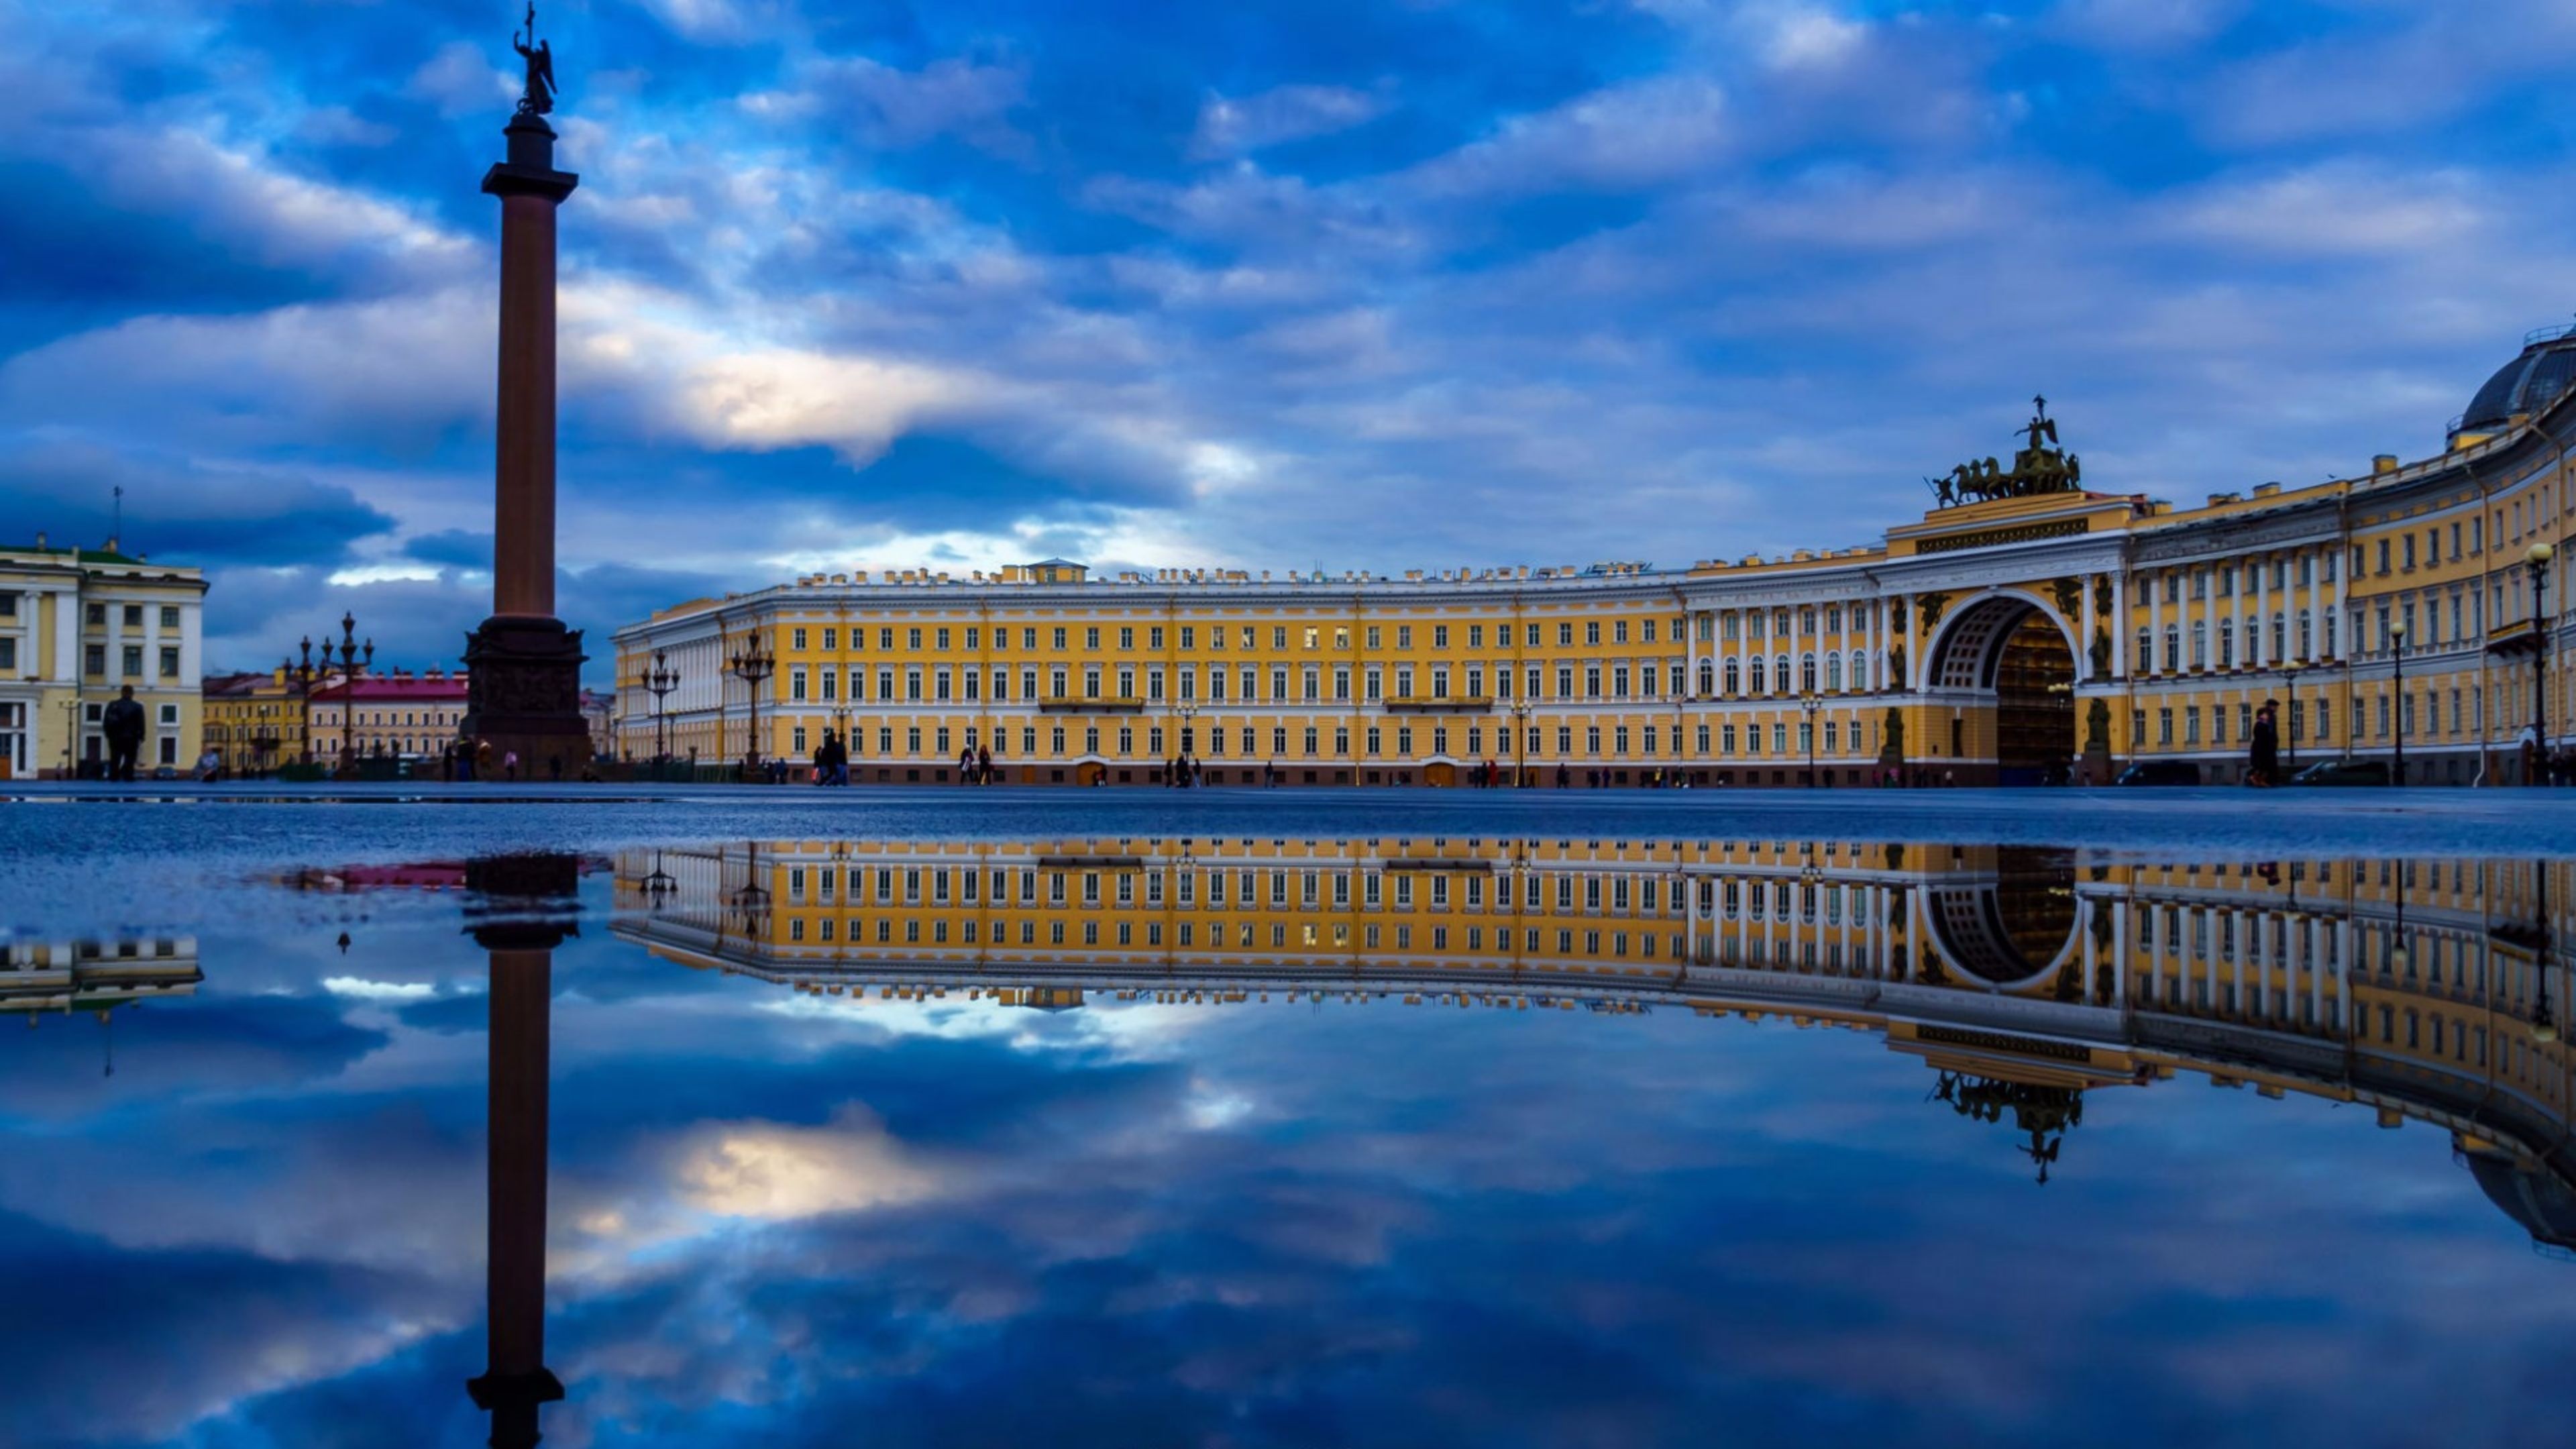 City Square: Palace Plaza in Saint Petersburg, General Staff Building, The Hermitage, Russia. 3840x2160 4K Wallpaper.